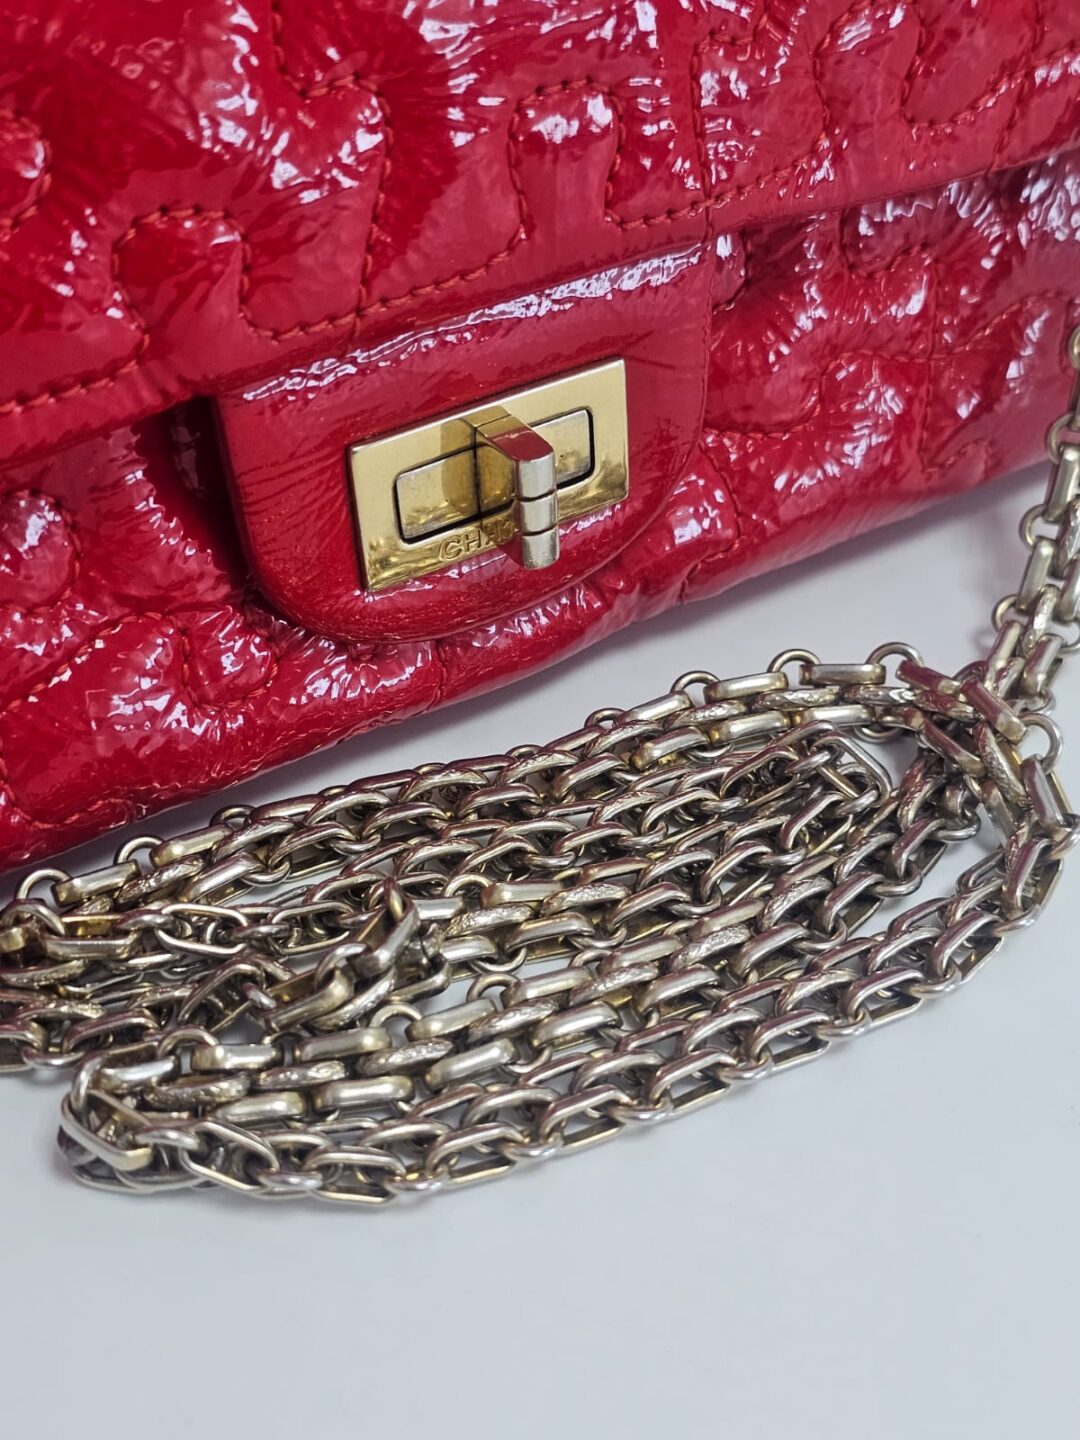 Chanel - Authenticated 2.55 Long Handbag - Patent Leather Red Plain for Women, Very Good Condition